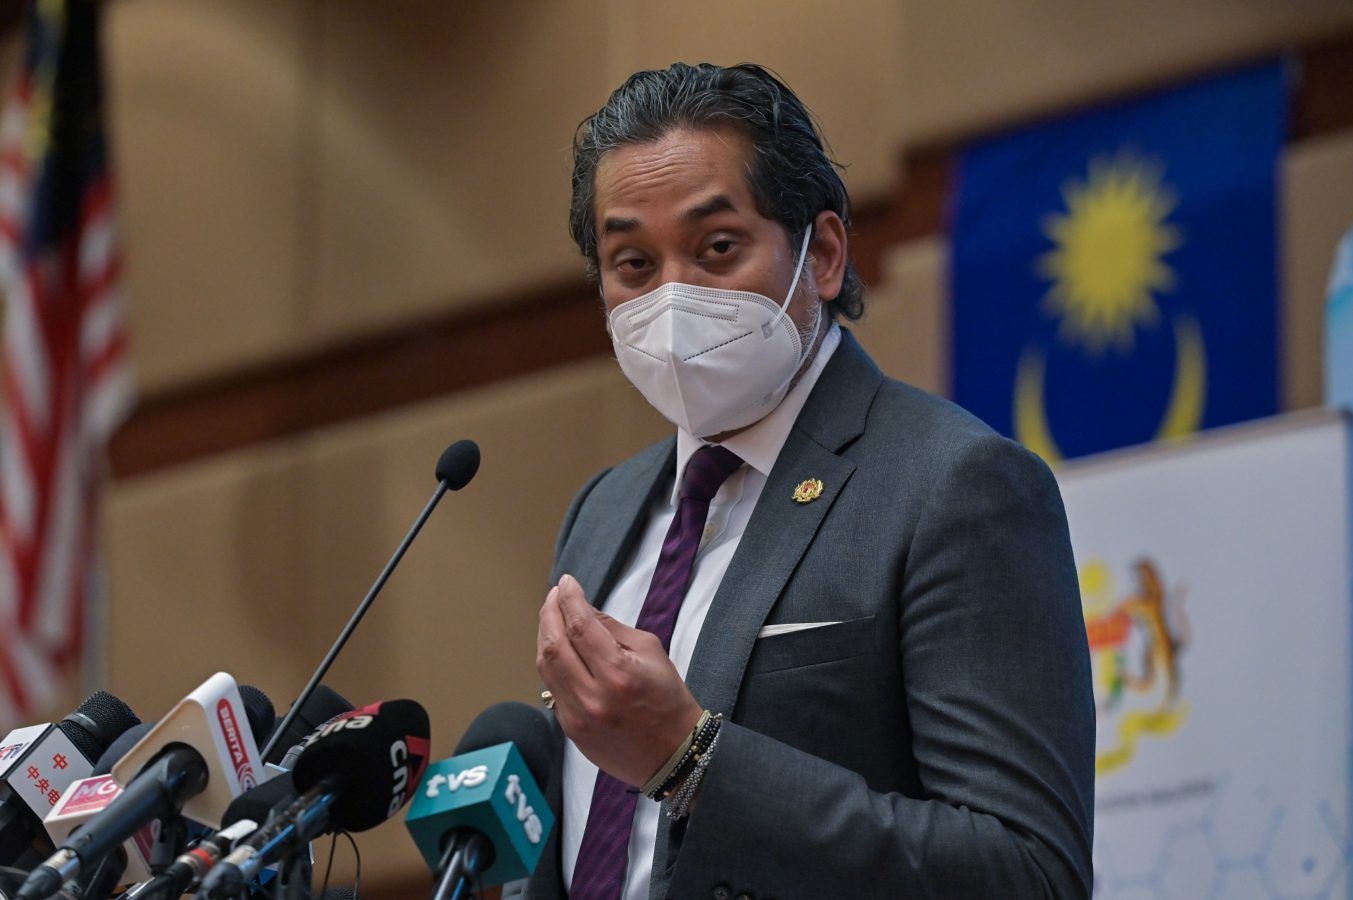 Malaysia is set to ease Covid restrictions very soon, according to Khairy